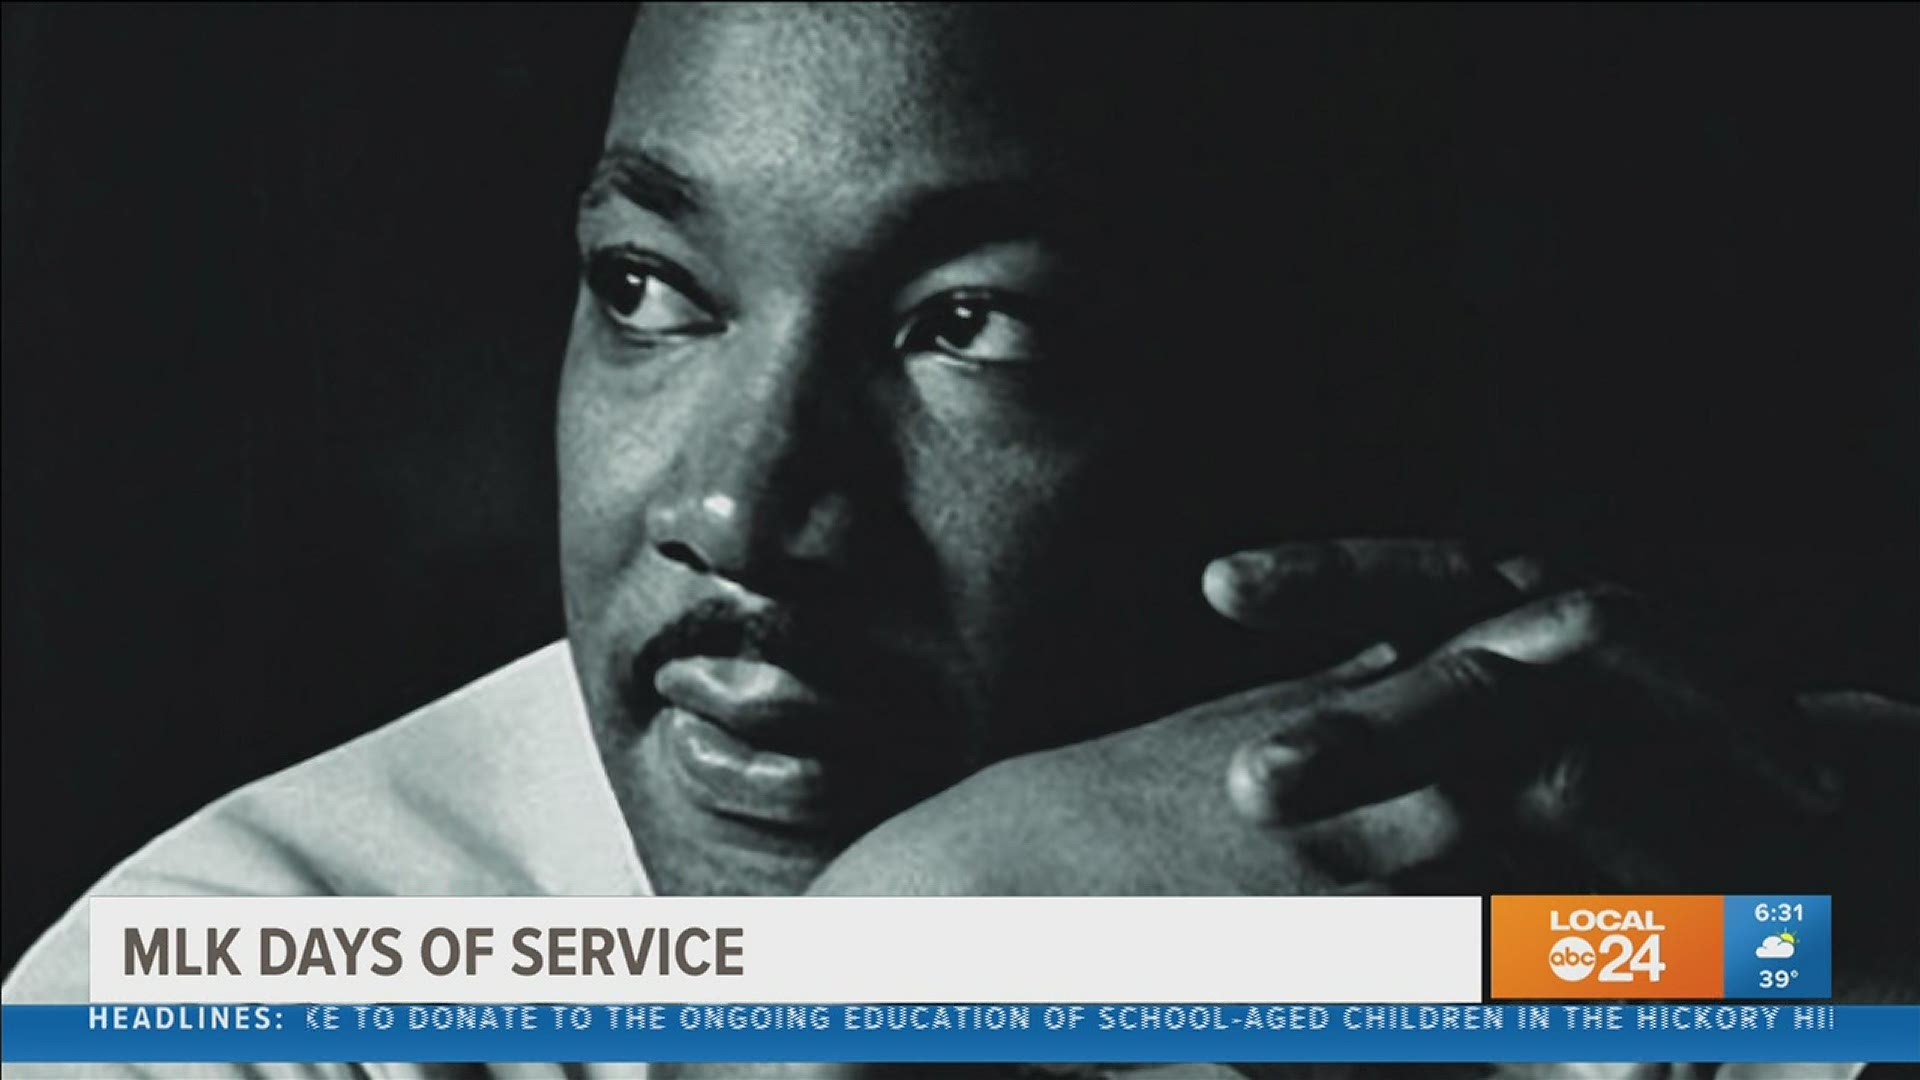 For the 5th annual MLK Days of Service, people can still improve their communities with virtual opportunities